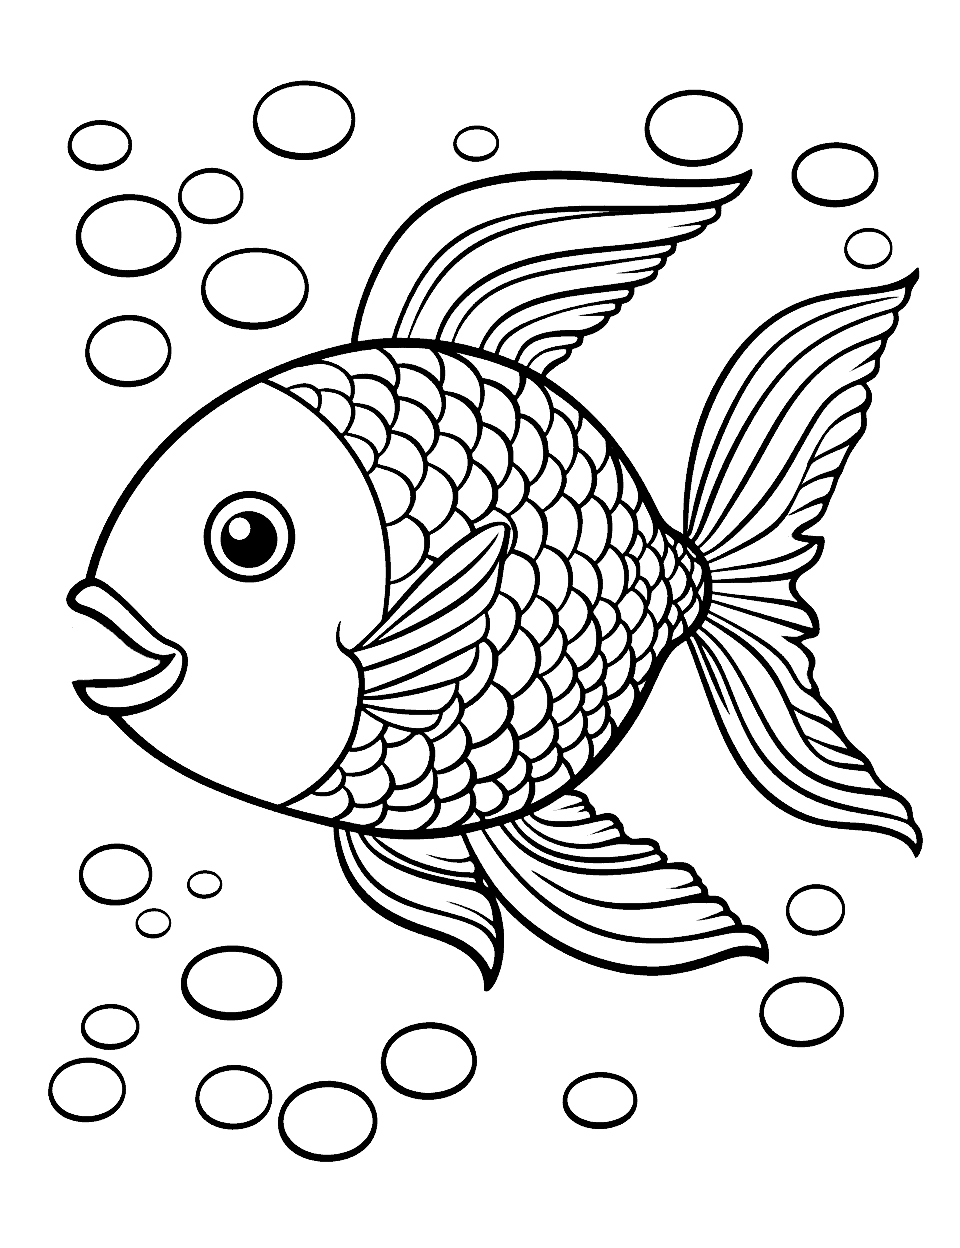 Fish Drawing Coloring Page - An outlined fish drawing, allowing children to fill in the patterns and colors.